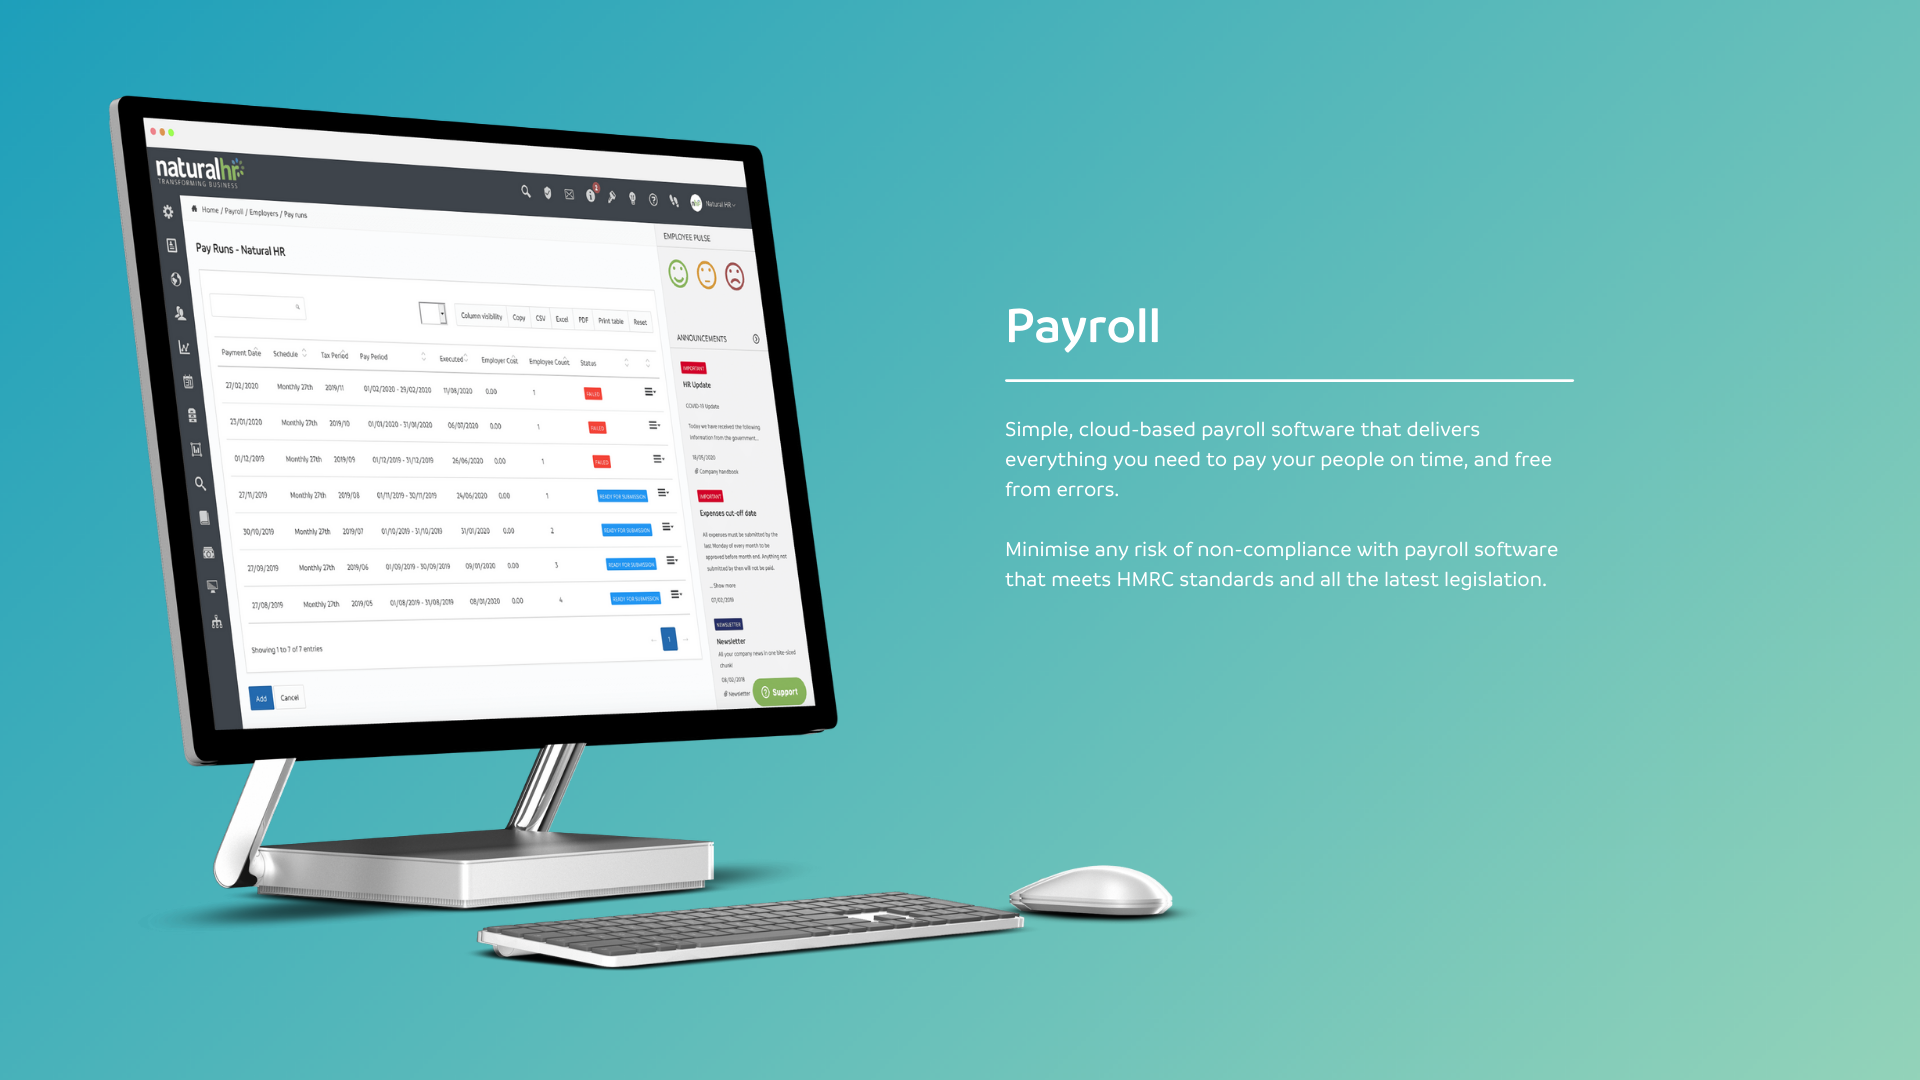 Natural HR Software - Simple, cloud-based payroll software that delivers everything you need to pay your people on time, and free from errors.